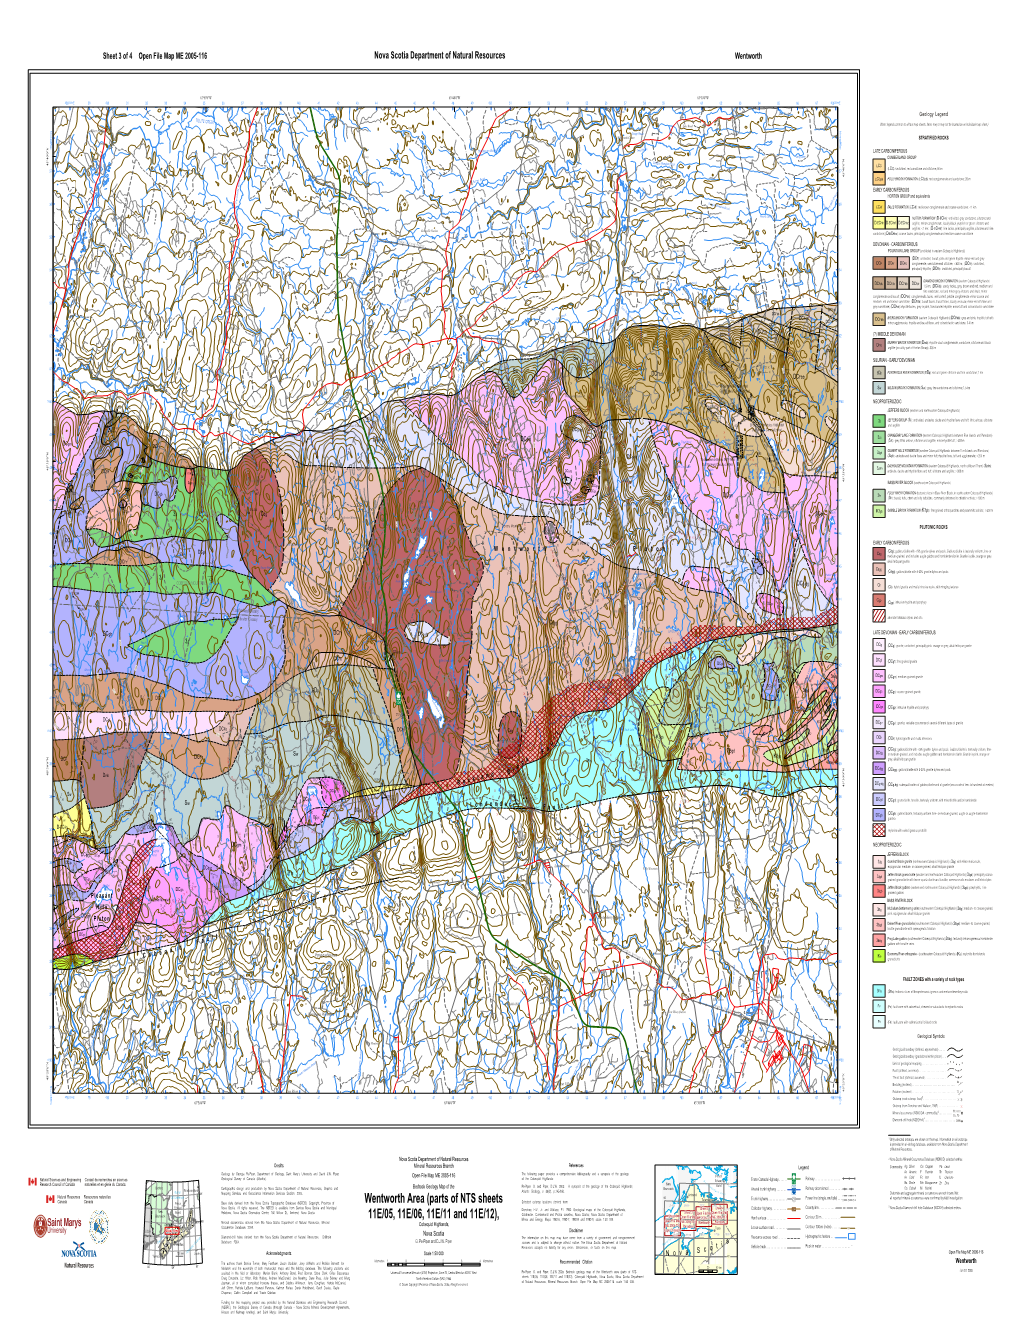 OFM ME 2005-116, Bedrock Geology Map of the Wentworth Area